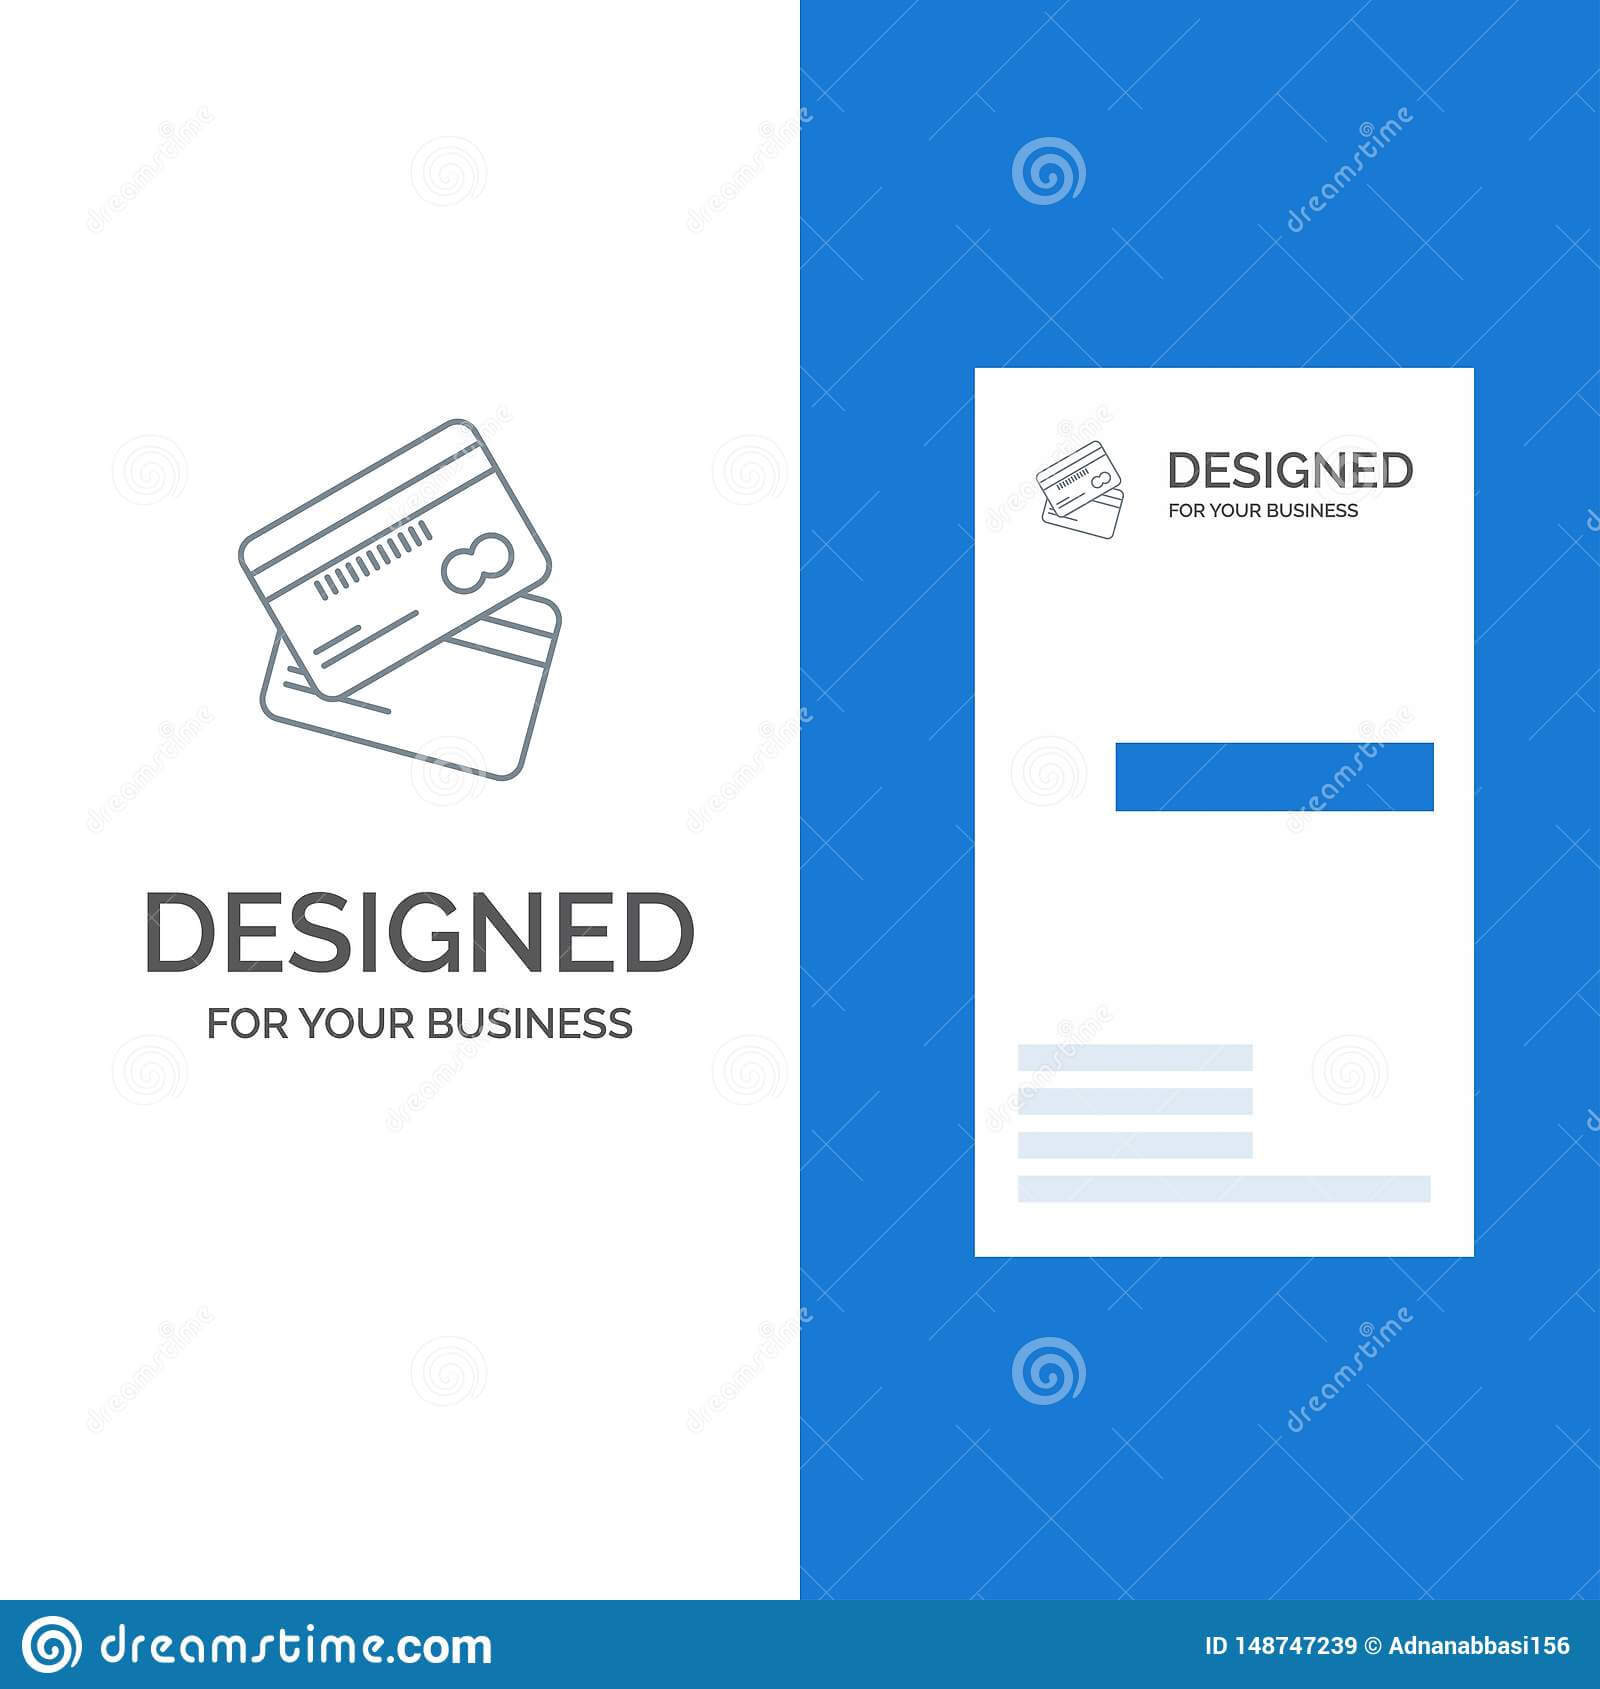 Credit Card, Business, Cards, Credit Card, Finance, Money For Credit Card Templates For Sale